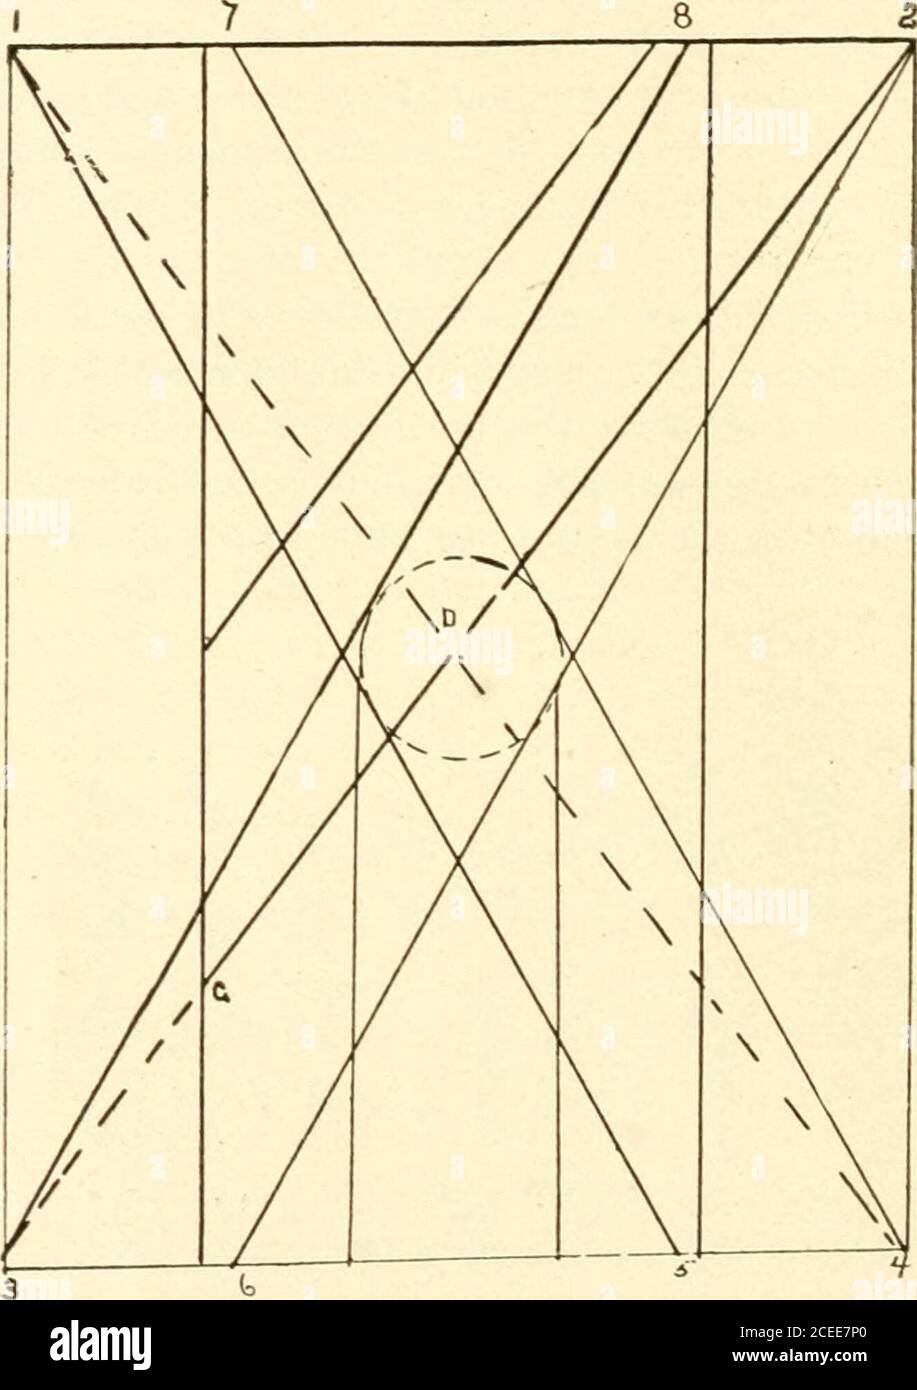 . How to make show cards; a practical treatise for the use of retail merchants and their clerks. ght to lower left corners.To place the slanting bat, find the center E by dottedlines 11, 12 and its corresponding cross lines. Setthe compass at half limb width and draw the circleas noted by dotted line, then draw a line from 11just touching the outside of circle and passing on HOW TO MAKE SHOW CARDS. 37 to the lower limb of Z ; from 12 draw a line touch-ing the circle to the upper bar. The mistake issometimes made of drawing the slant from left toright instead of right to left. Looking at the mo Stock Photo